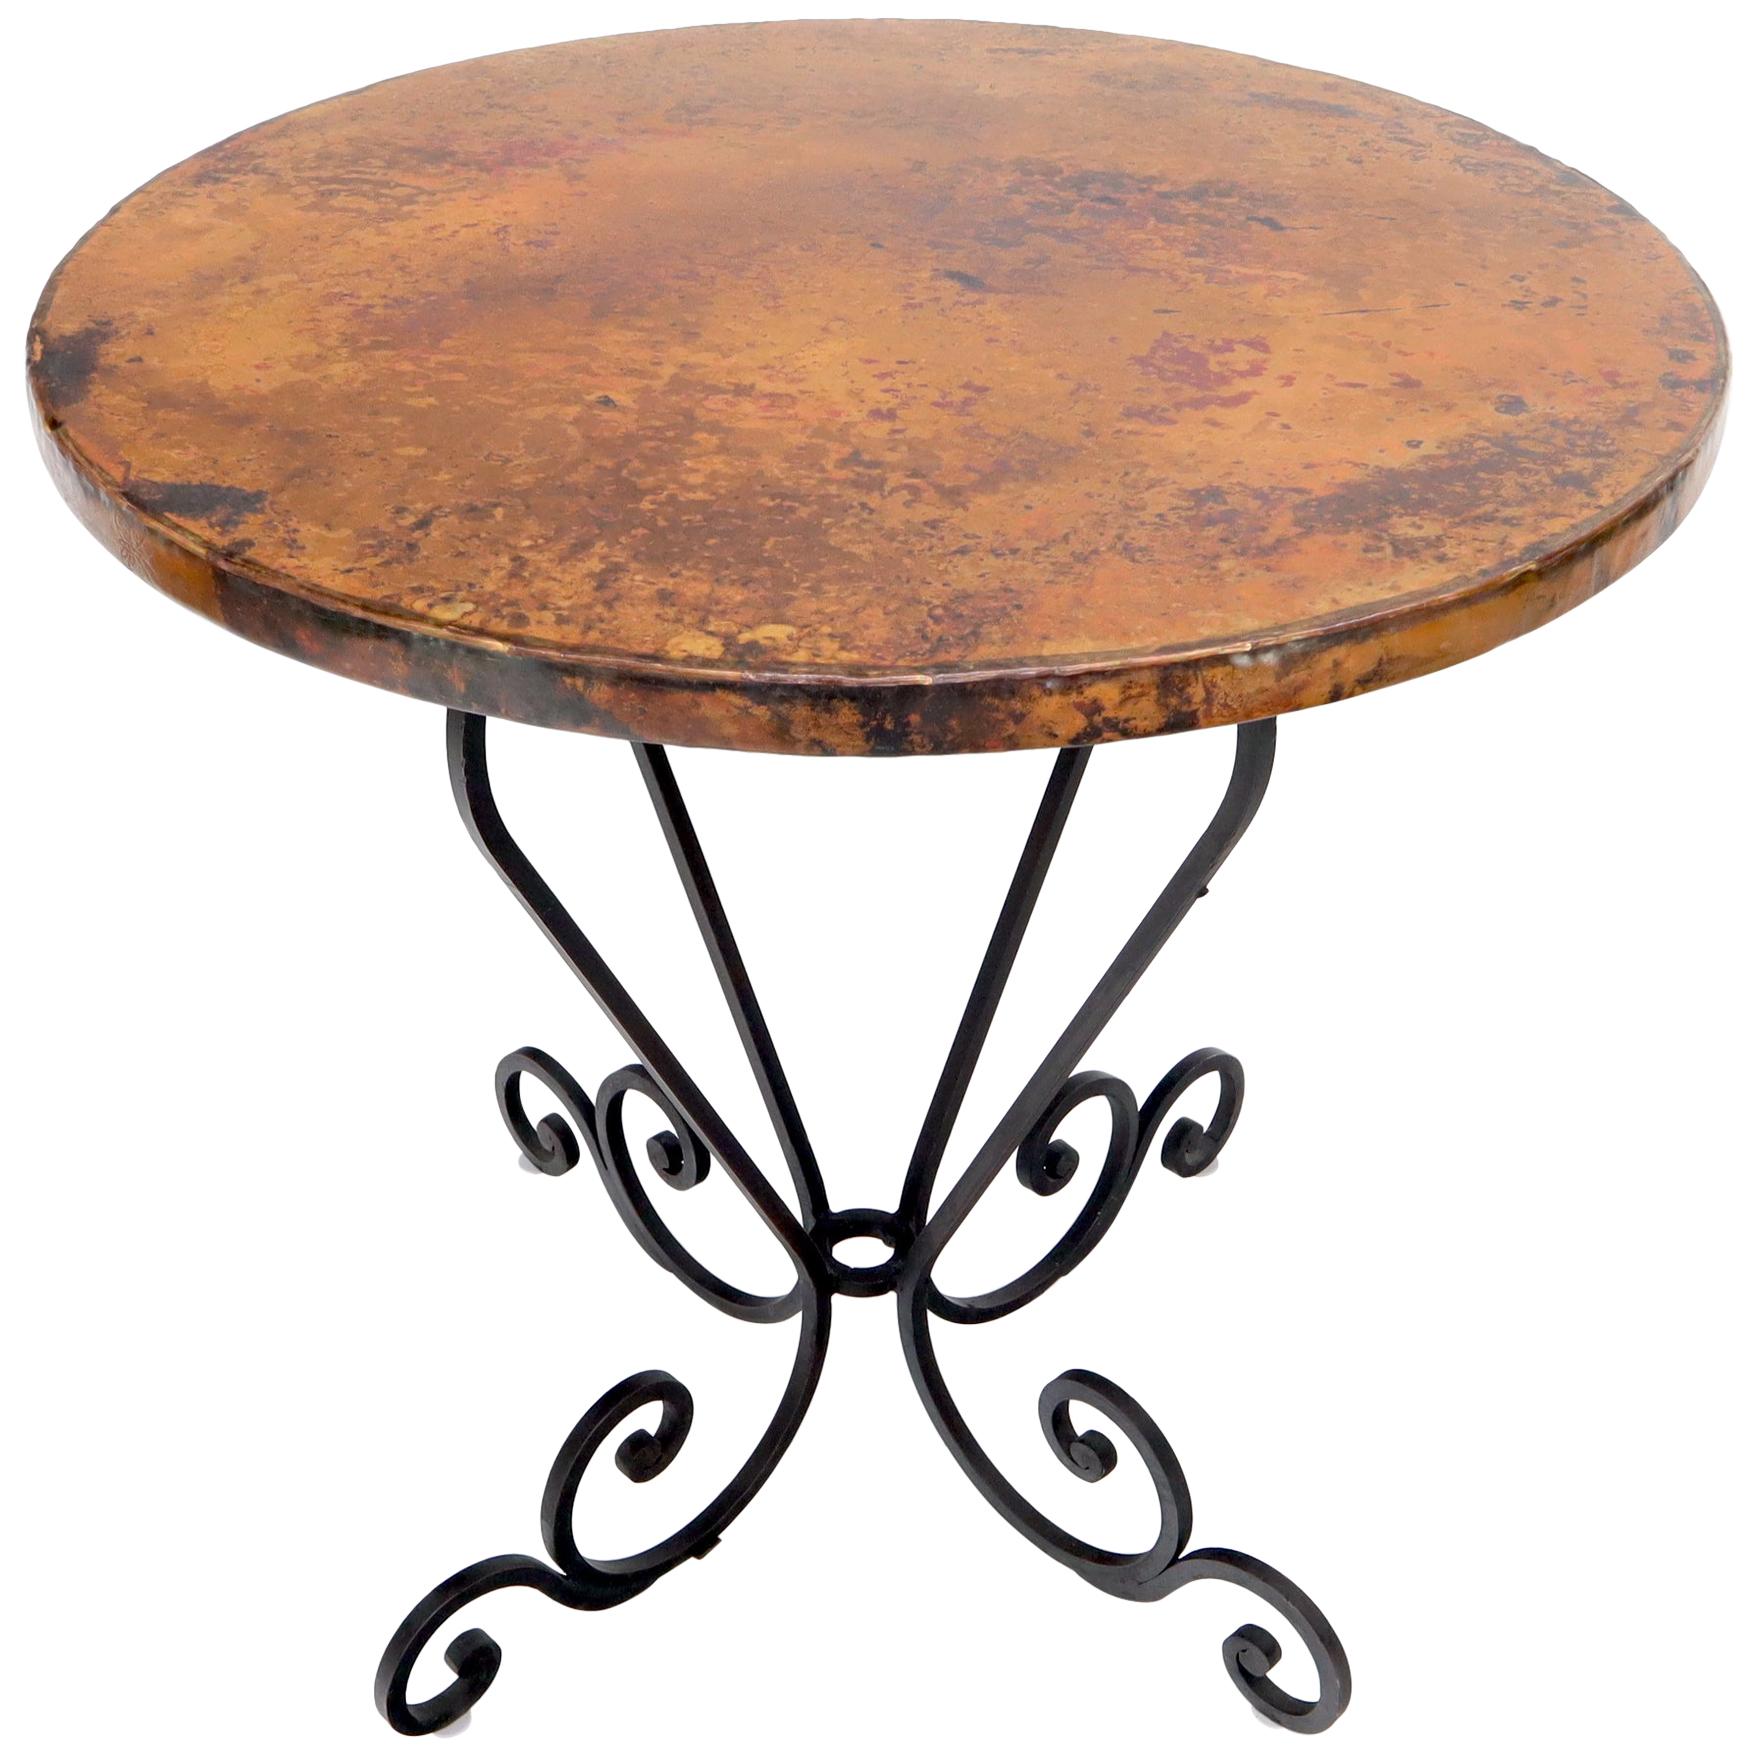 Hammered Coper Top Wrought Iron Base Round Dining Dinette Cafe Table For Sale